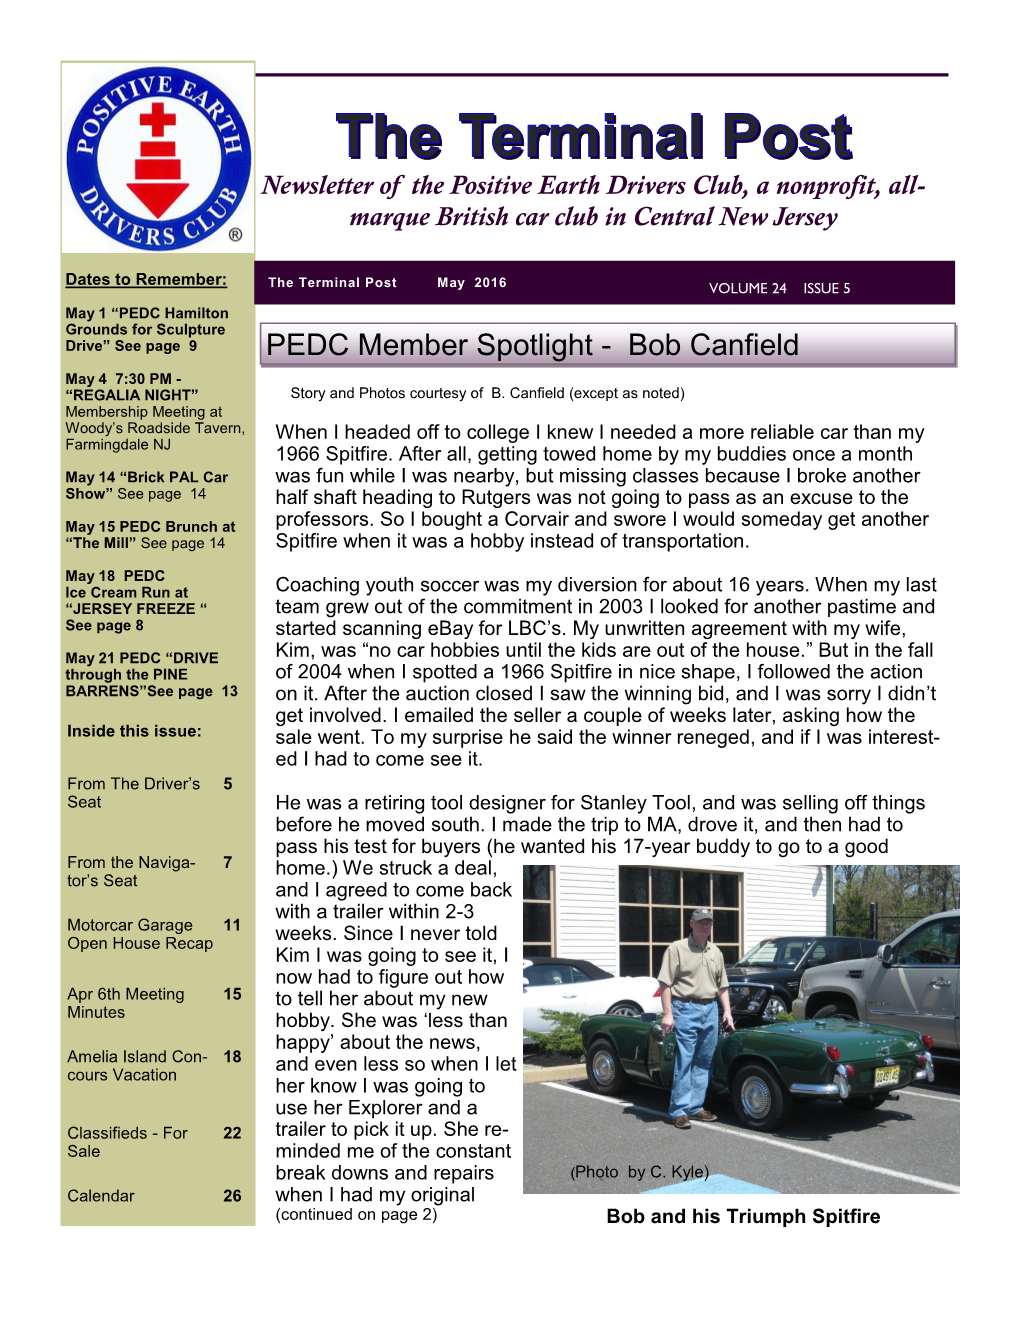 May 2016 VOLUME 24 ISSUE 5 VOLUME 24 ISSUE 5 May 1 “PEDC Hamilton Grounds for Sculpture Drive” See Page 9 PEDC Member Spotlight - Bob Canfield